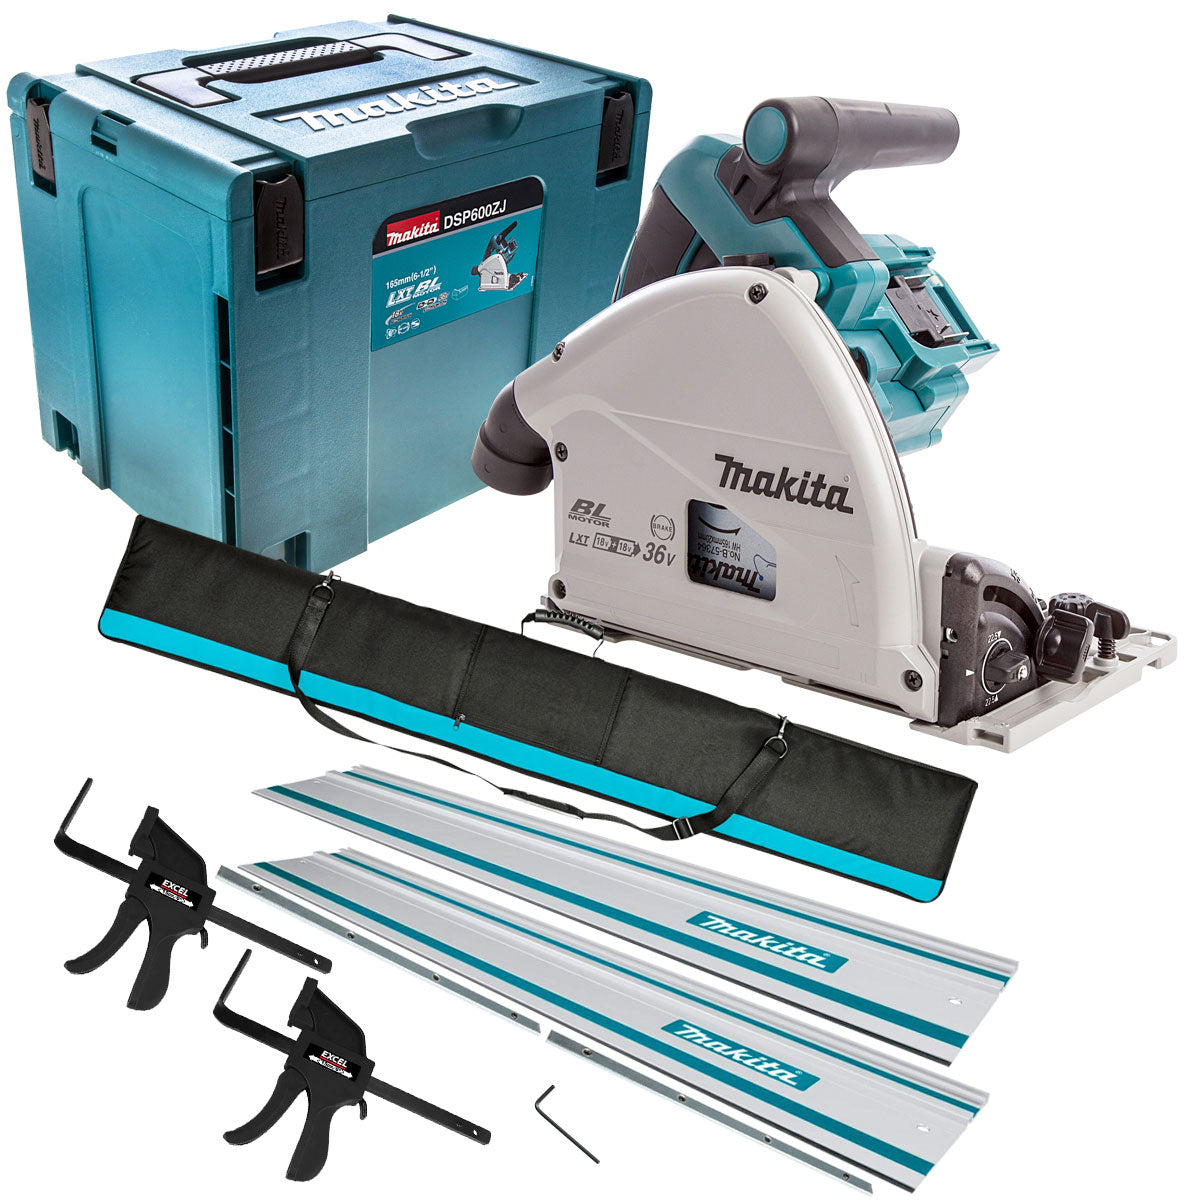 Makita DSP600ZJ 36V Brushless Plunge Saw + 2 x Guide Rail, Connector & Clamp Set